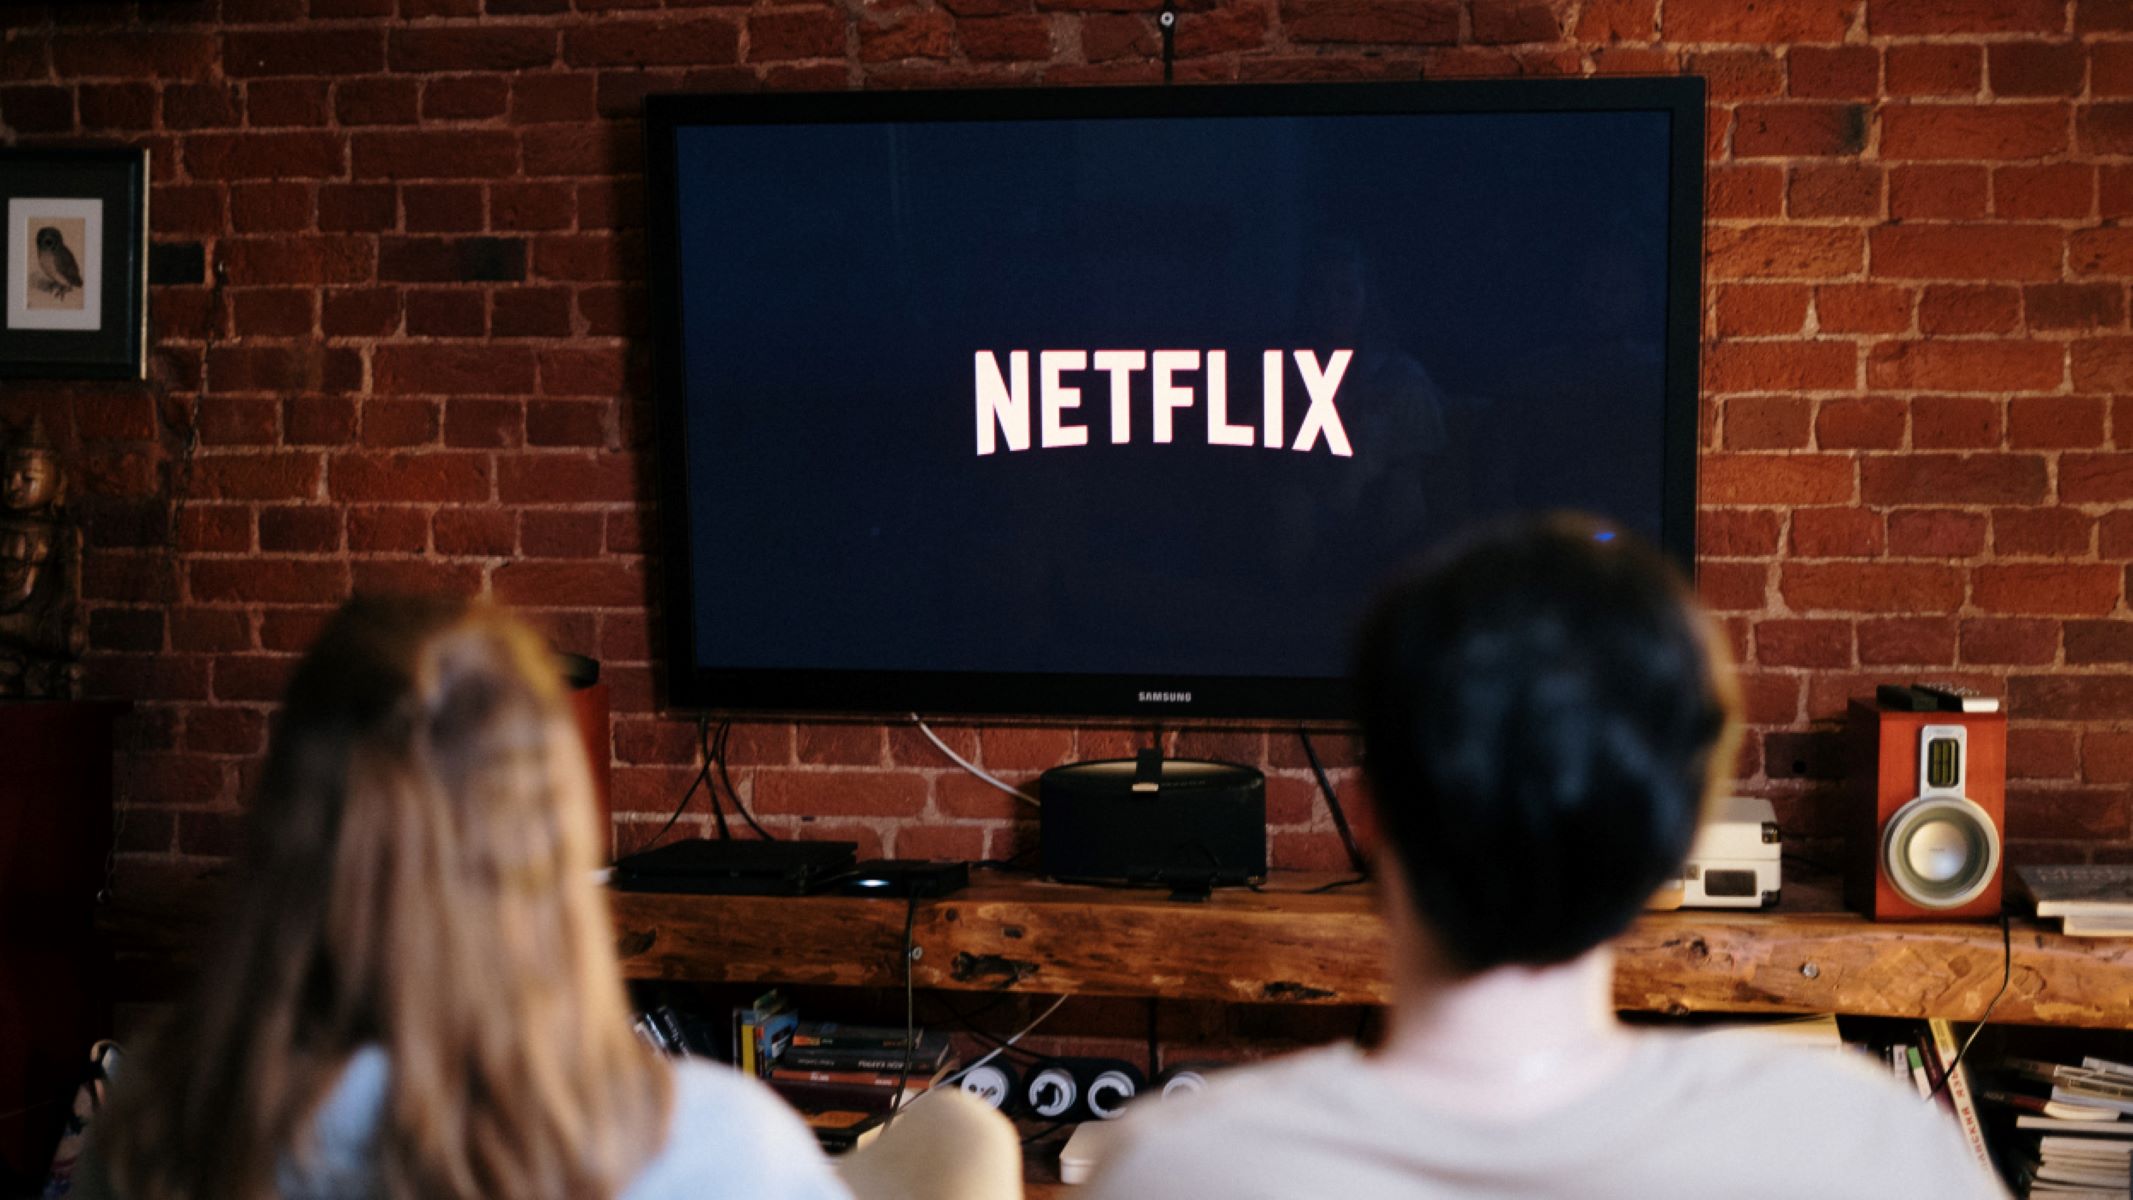 How To Watch Netflix For Free On Smart TV